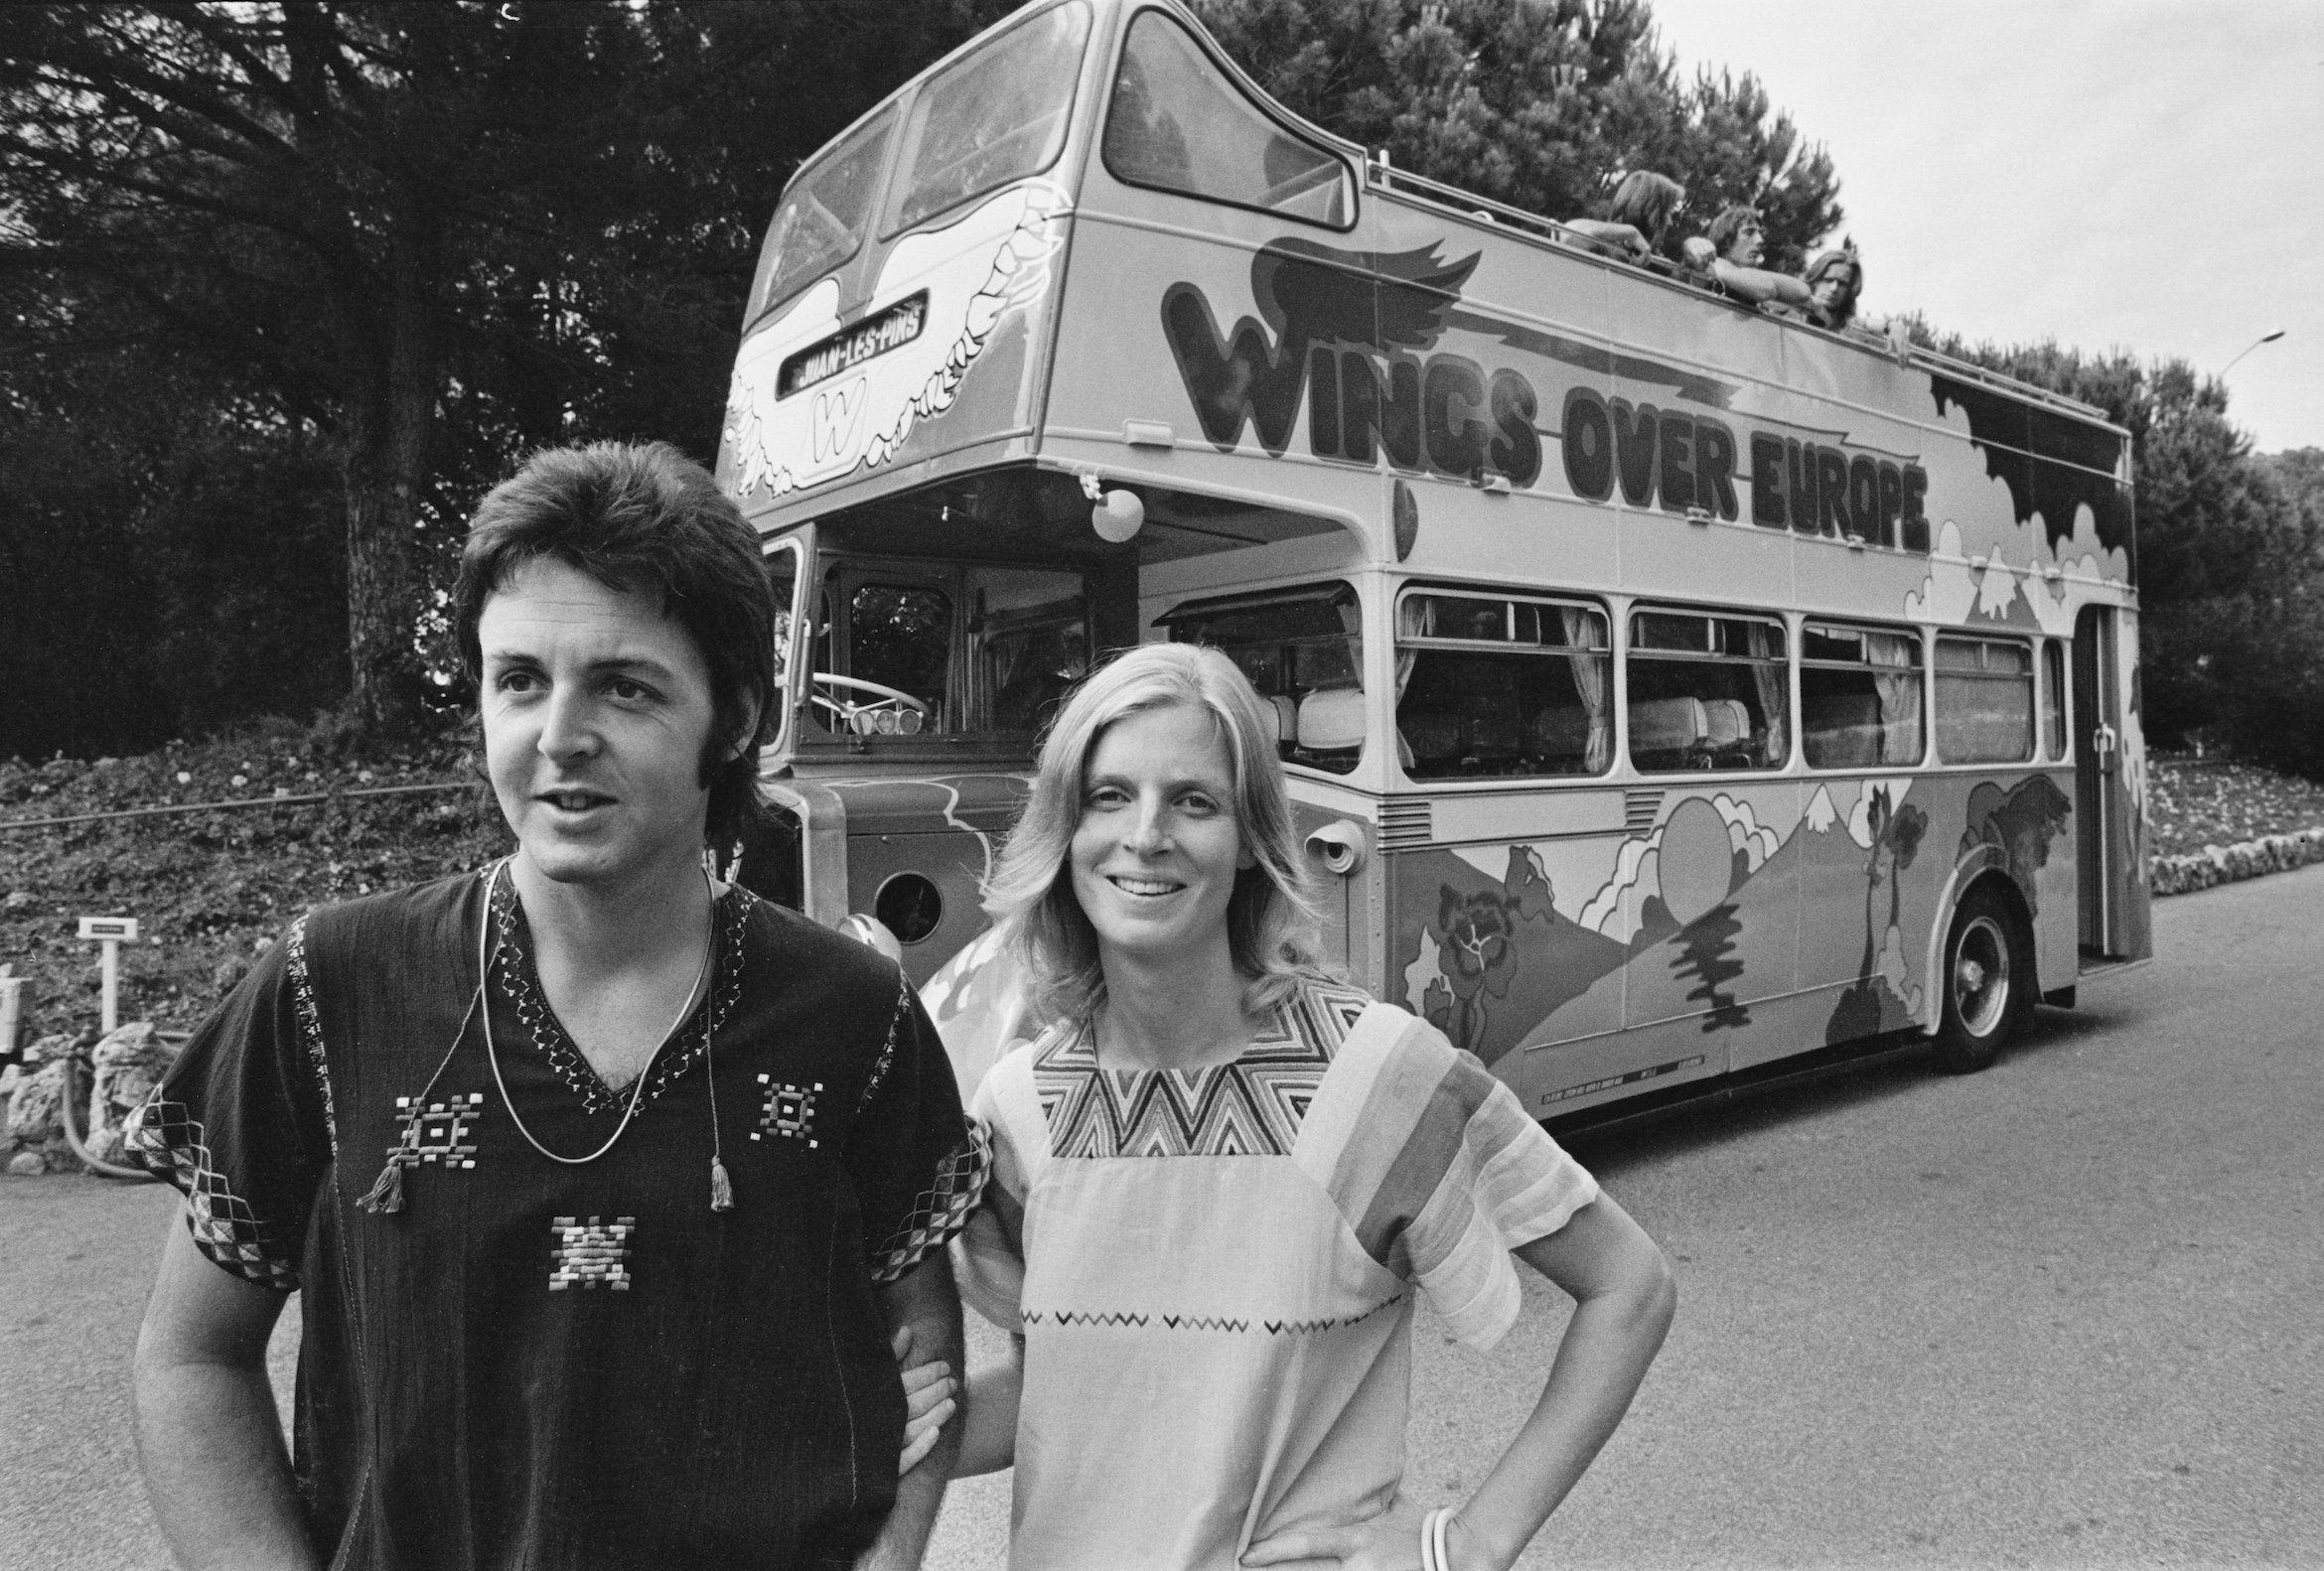 Paul McCartney and his wife Linda McCartney in front of the tour bus used by Wings in Europe